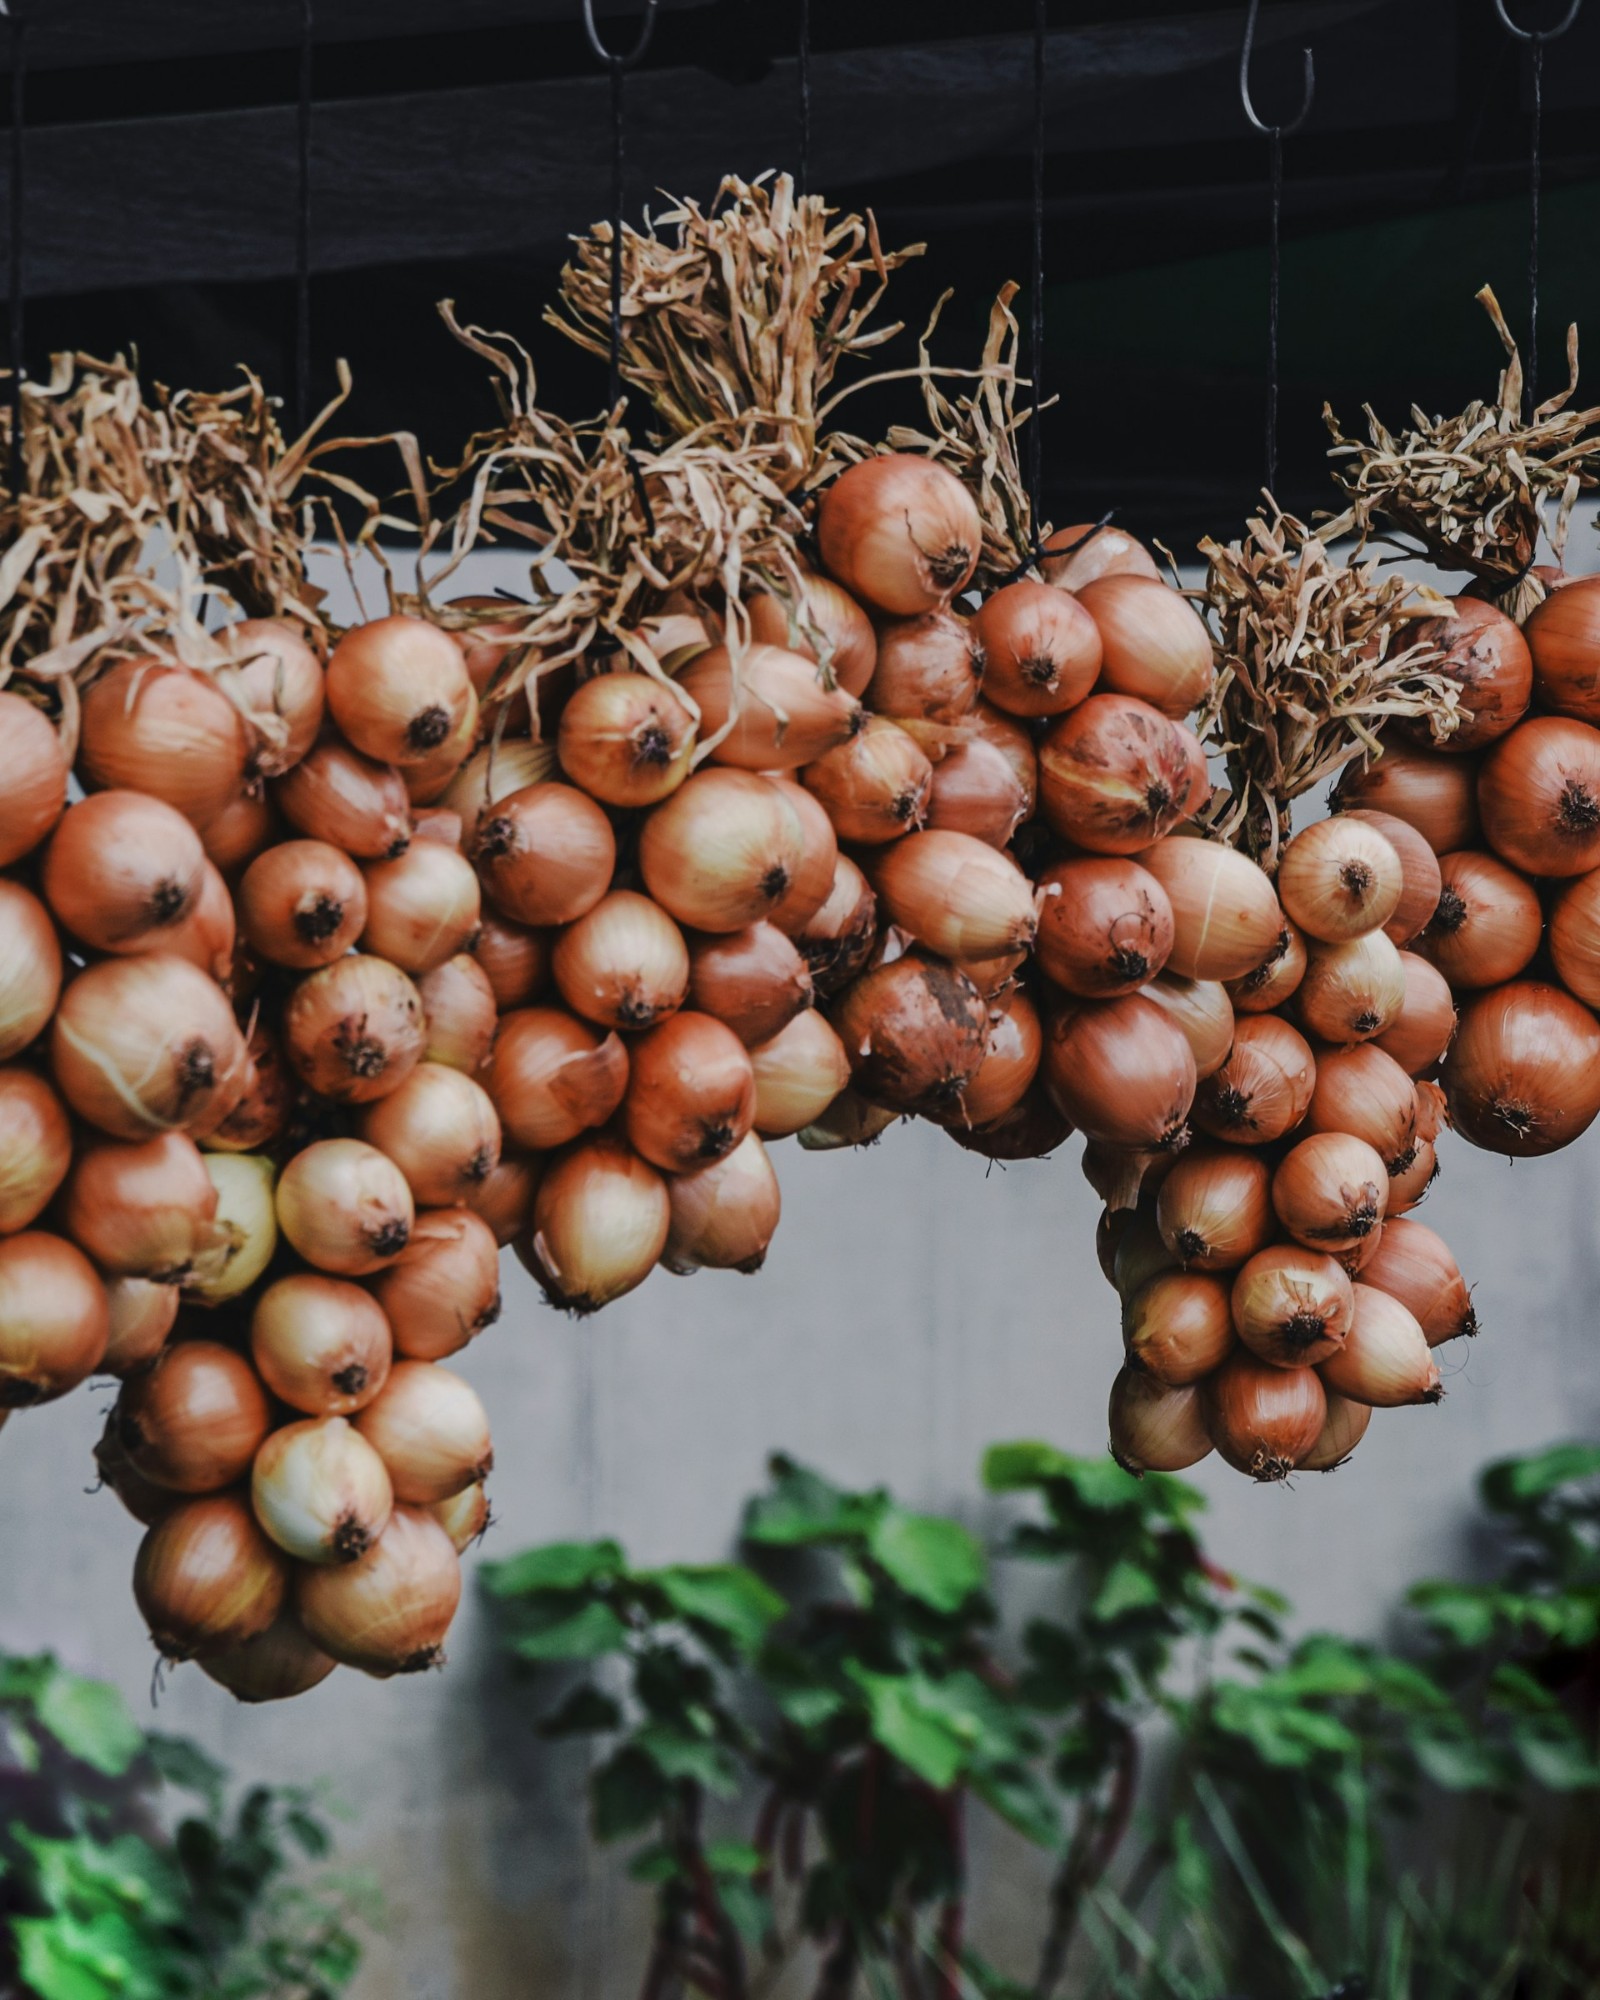 Braided onions hanging outside.